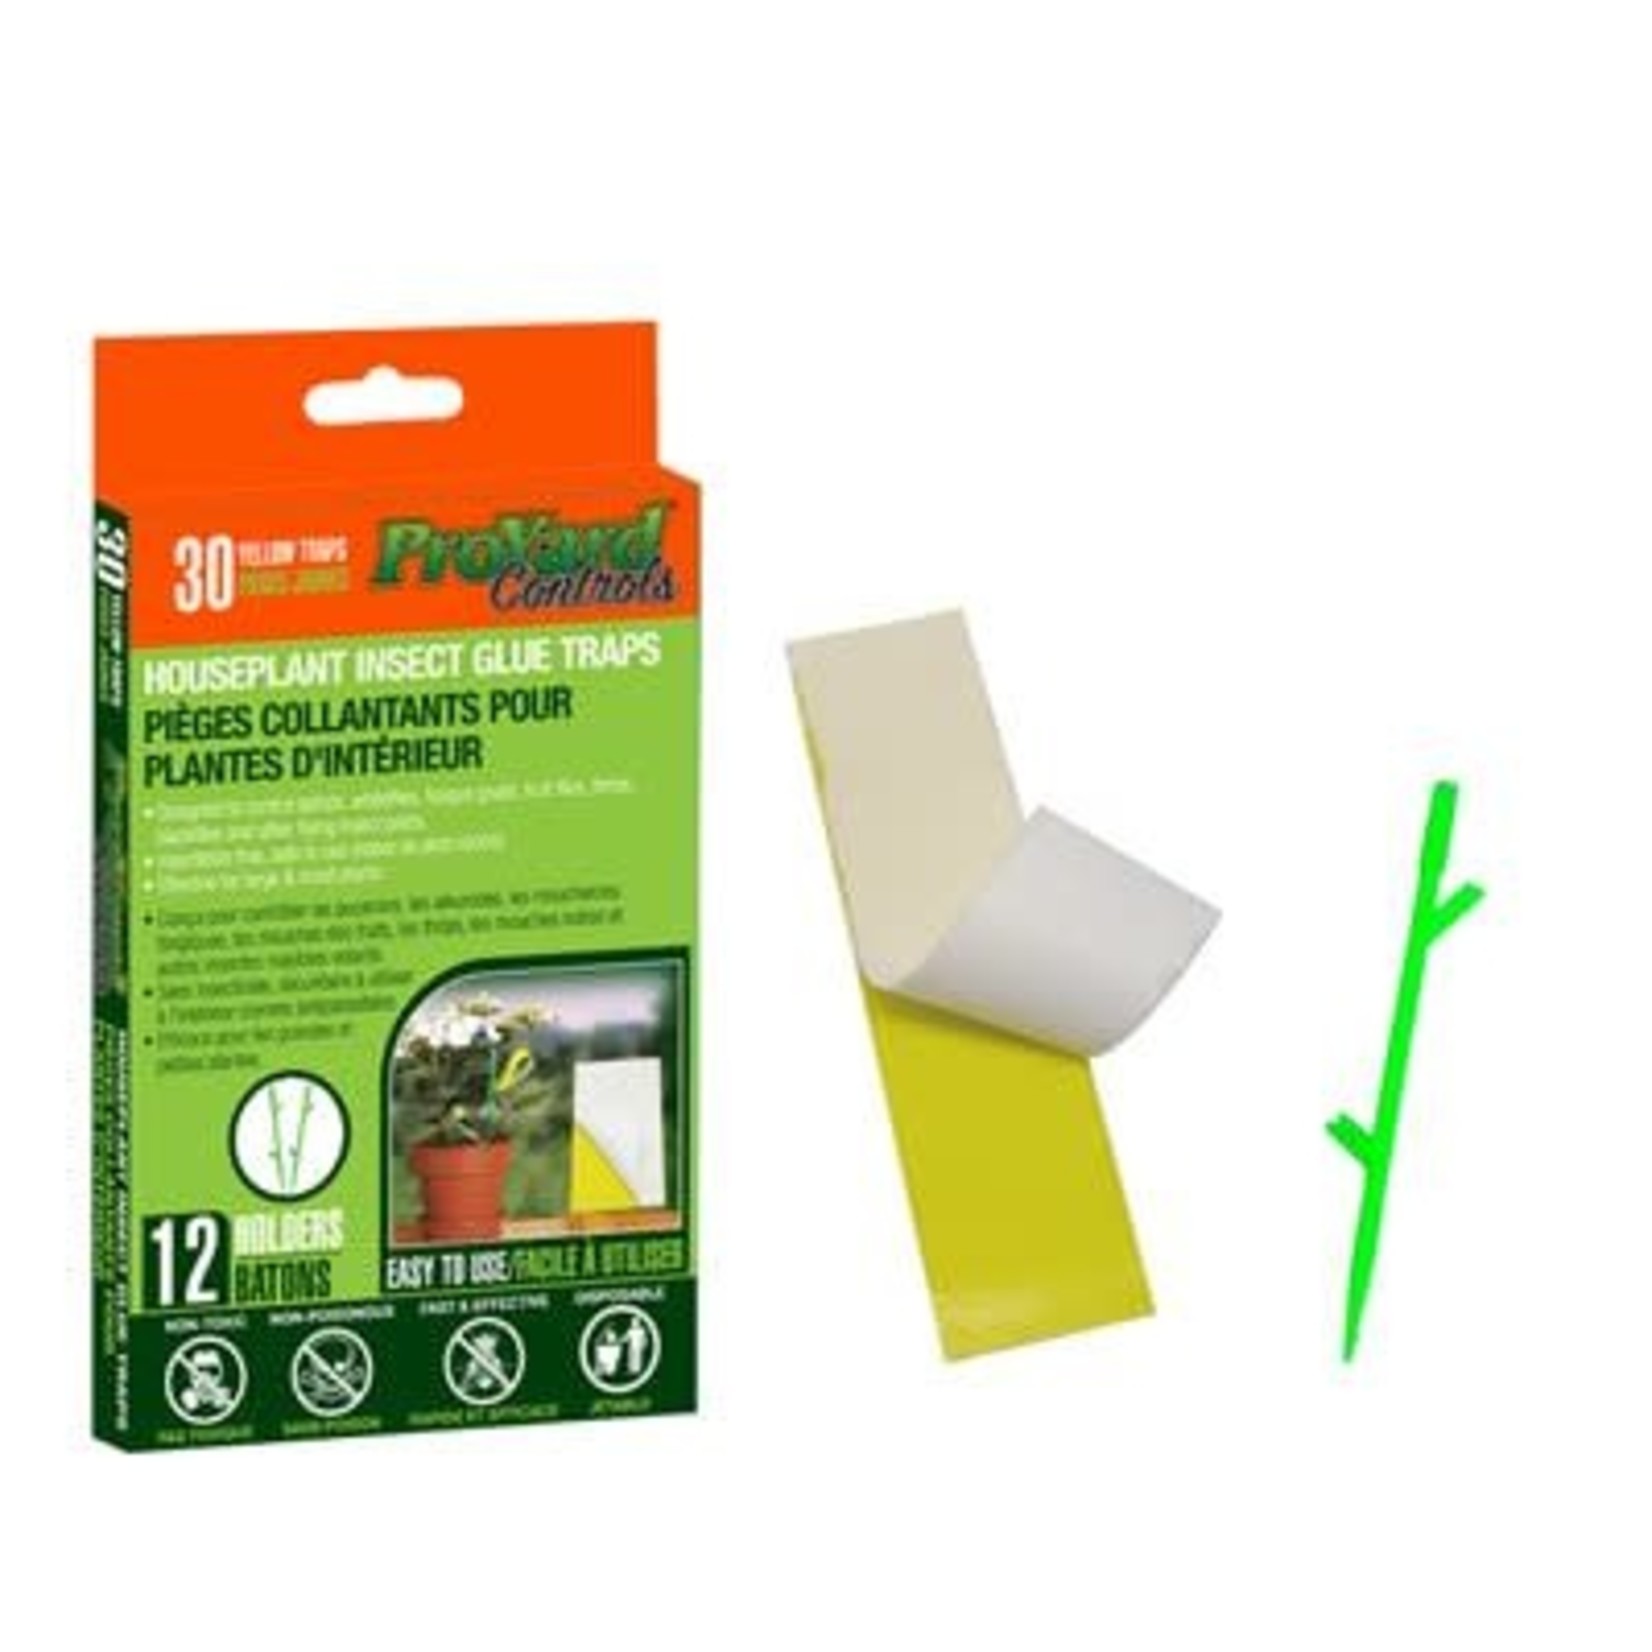 HOUSEPLANT INSECT GLUE TRAPS 30PK